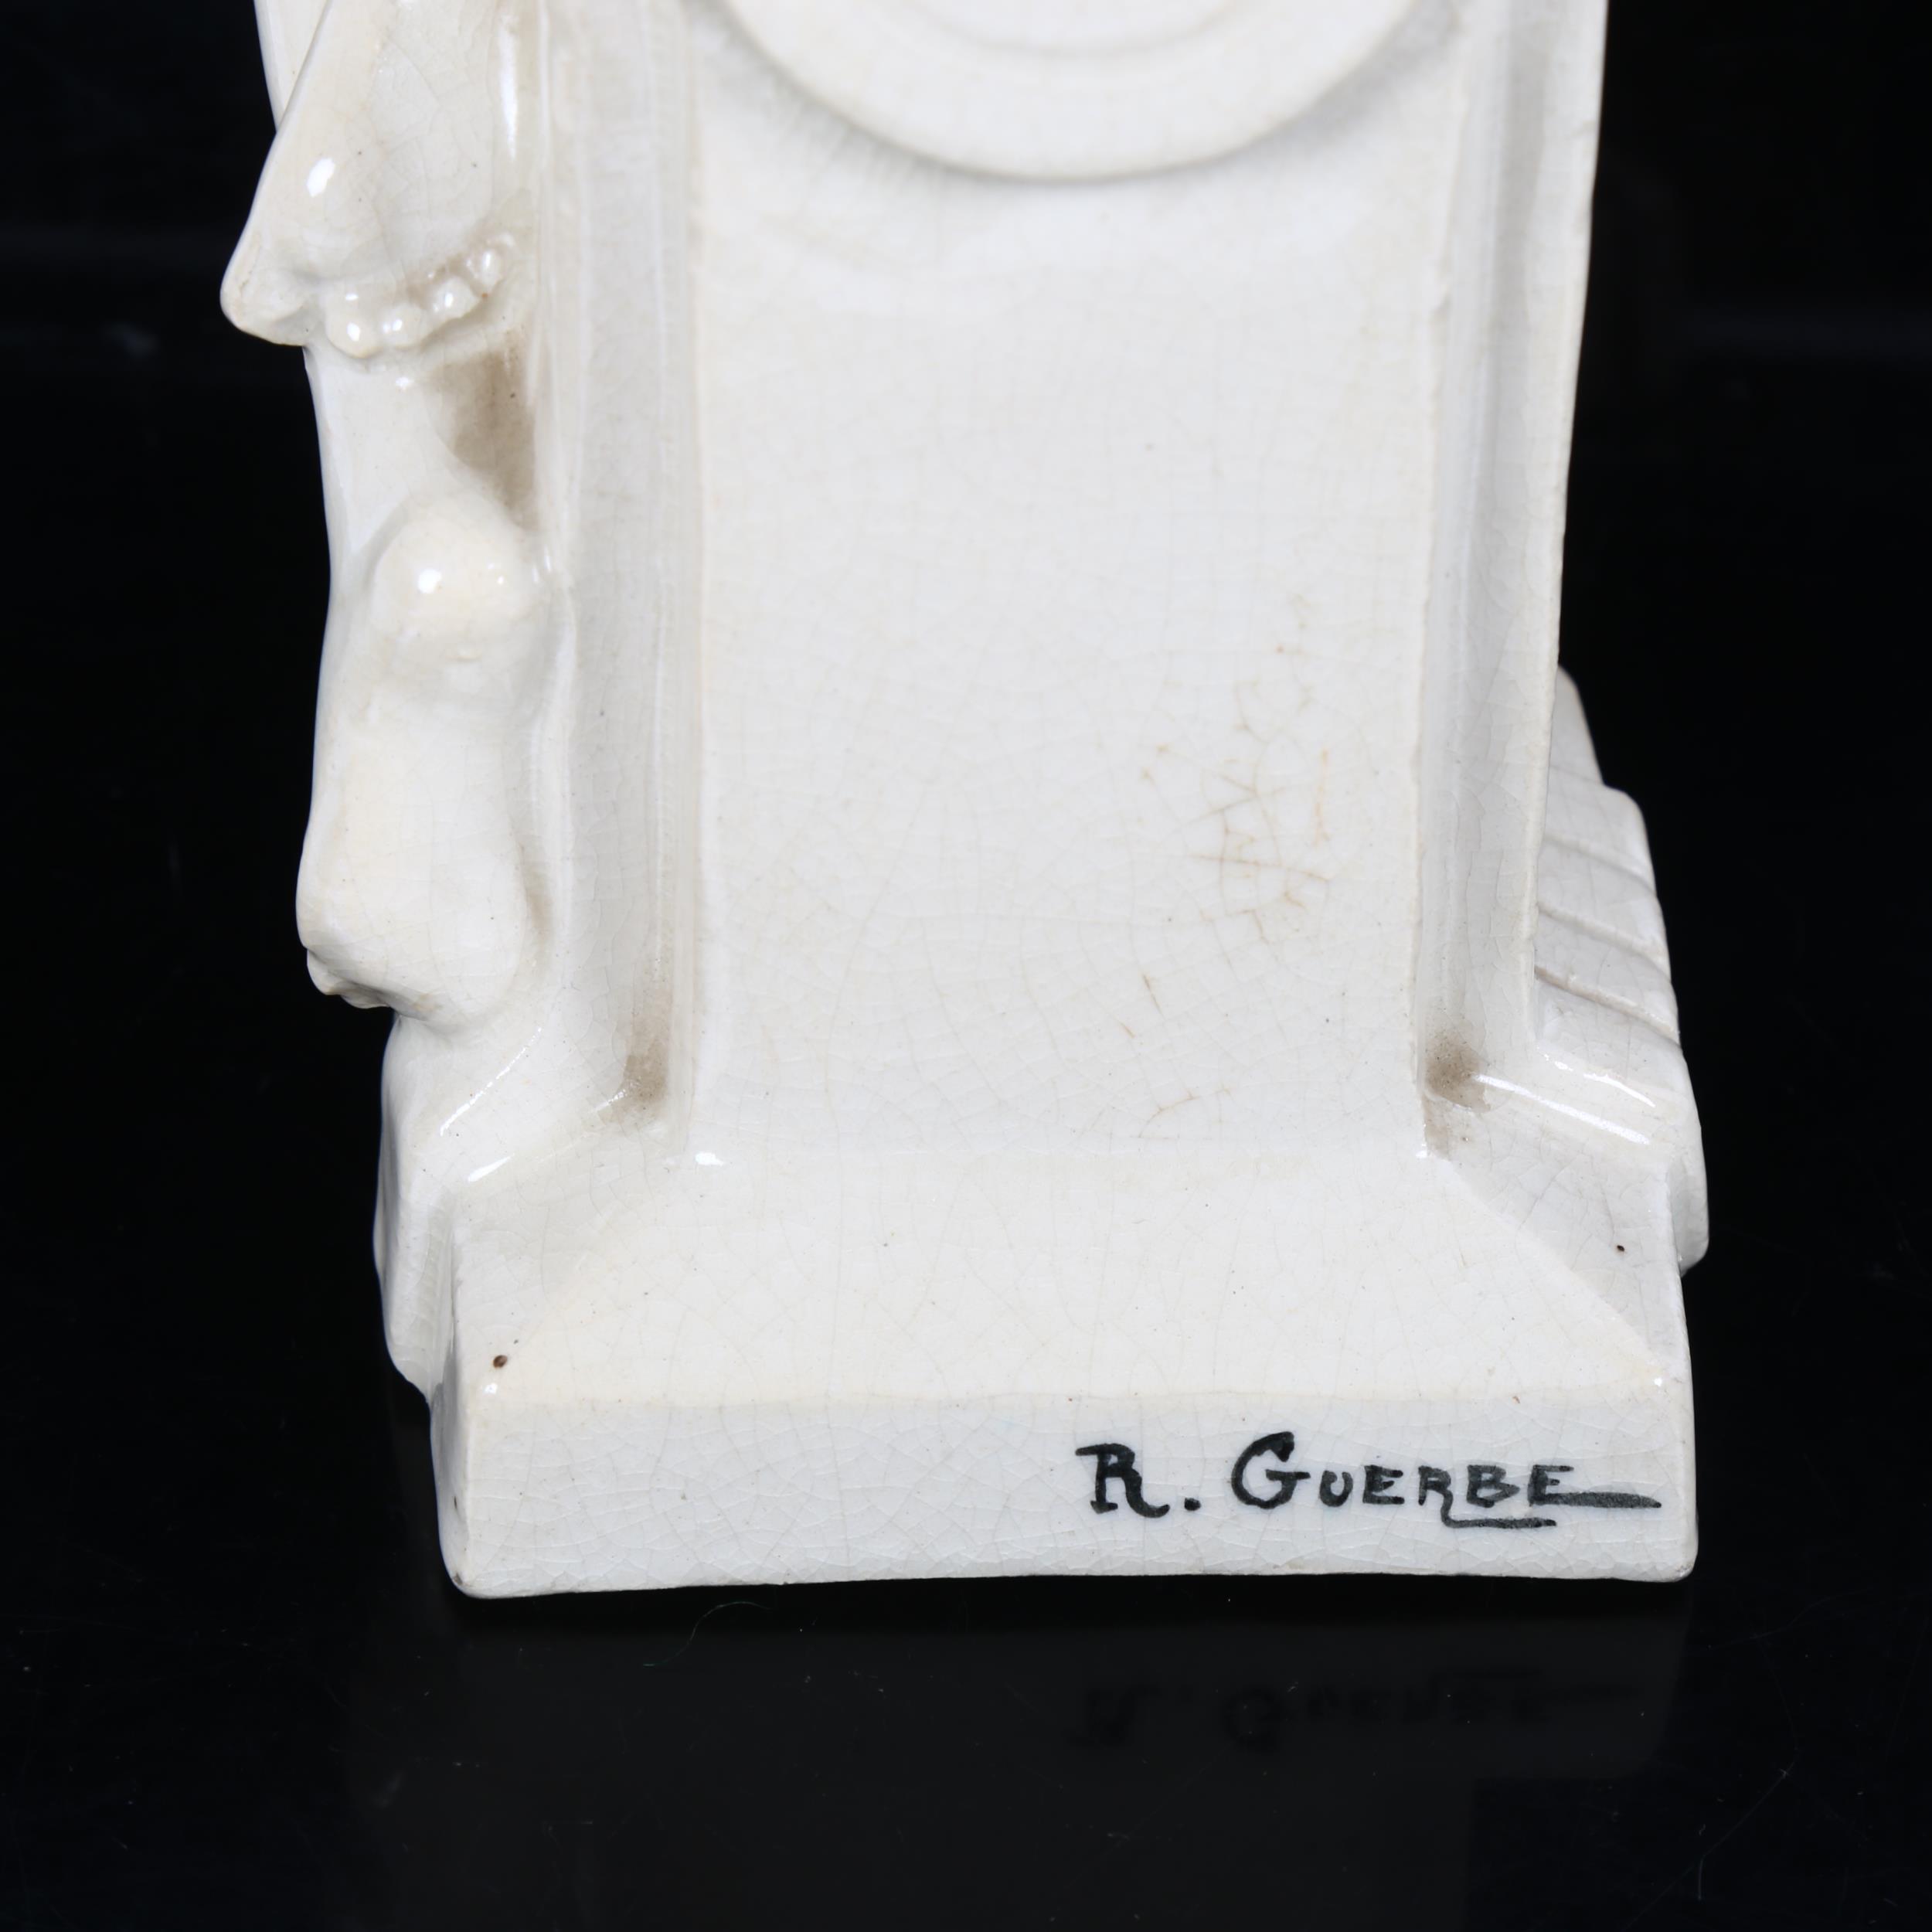 RAYMONDE GUERBE - an Art Deco crackle-glaze ceramic figure "Summer", signed to the back of the - Image 2 of 2